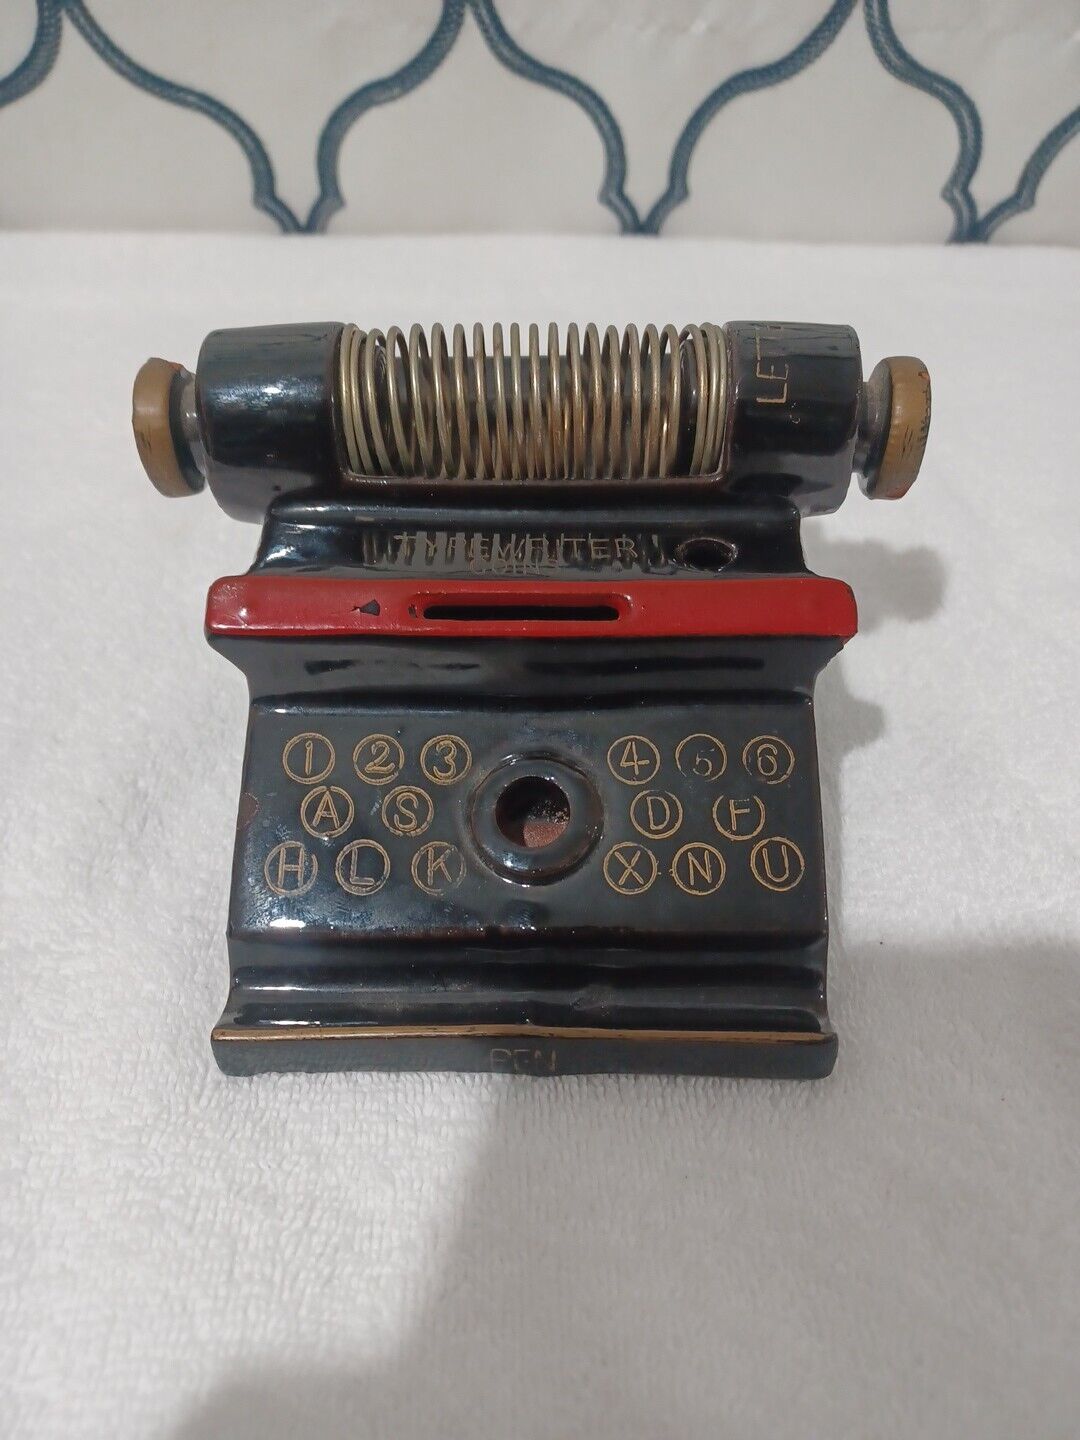 Vintage Typewriter Shaped Coin Bank Stationary Made In Japan 1940s